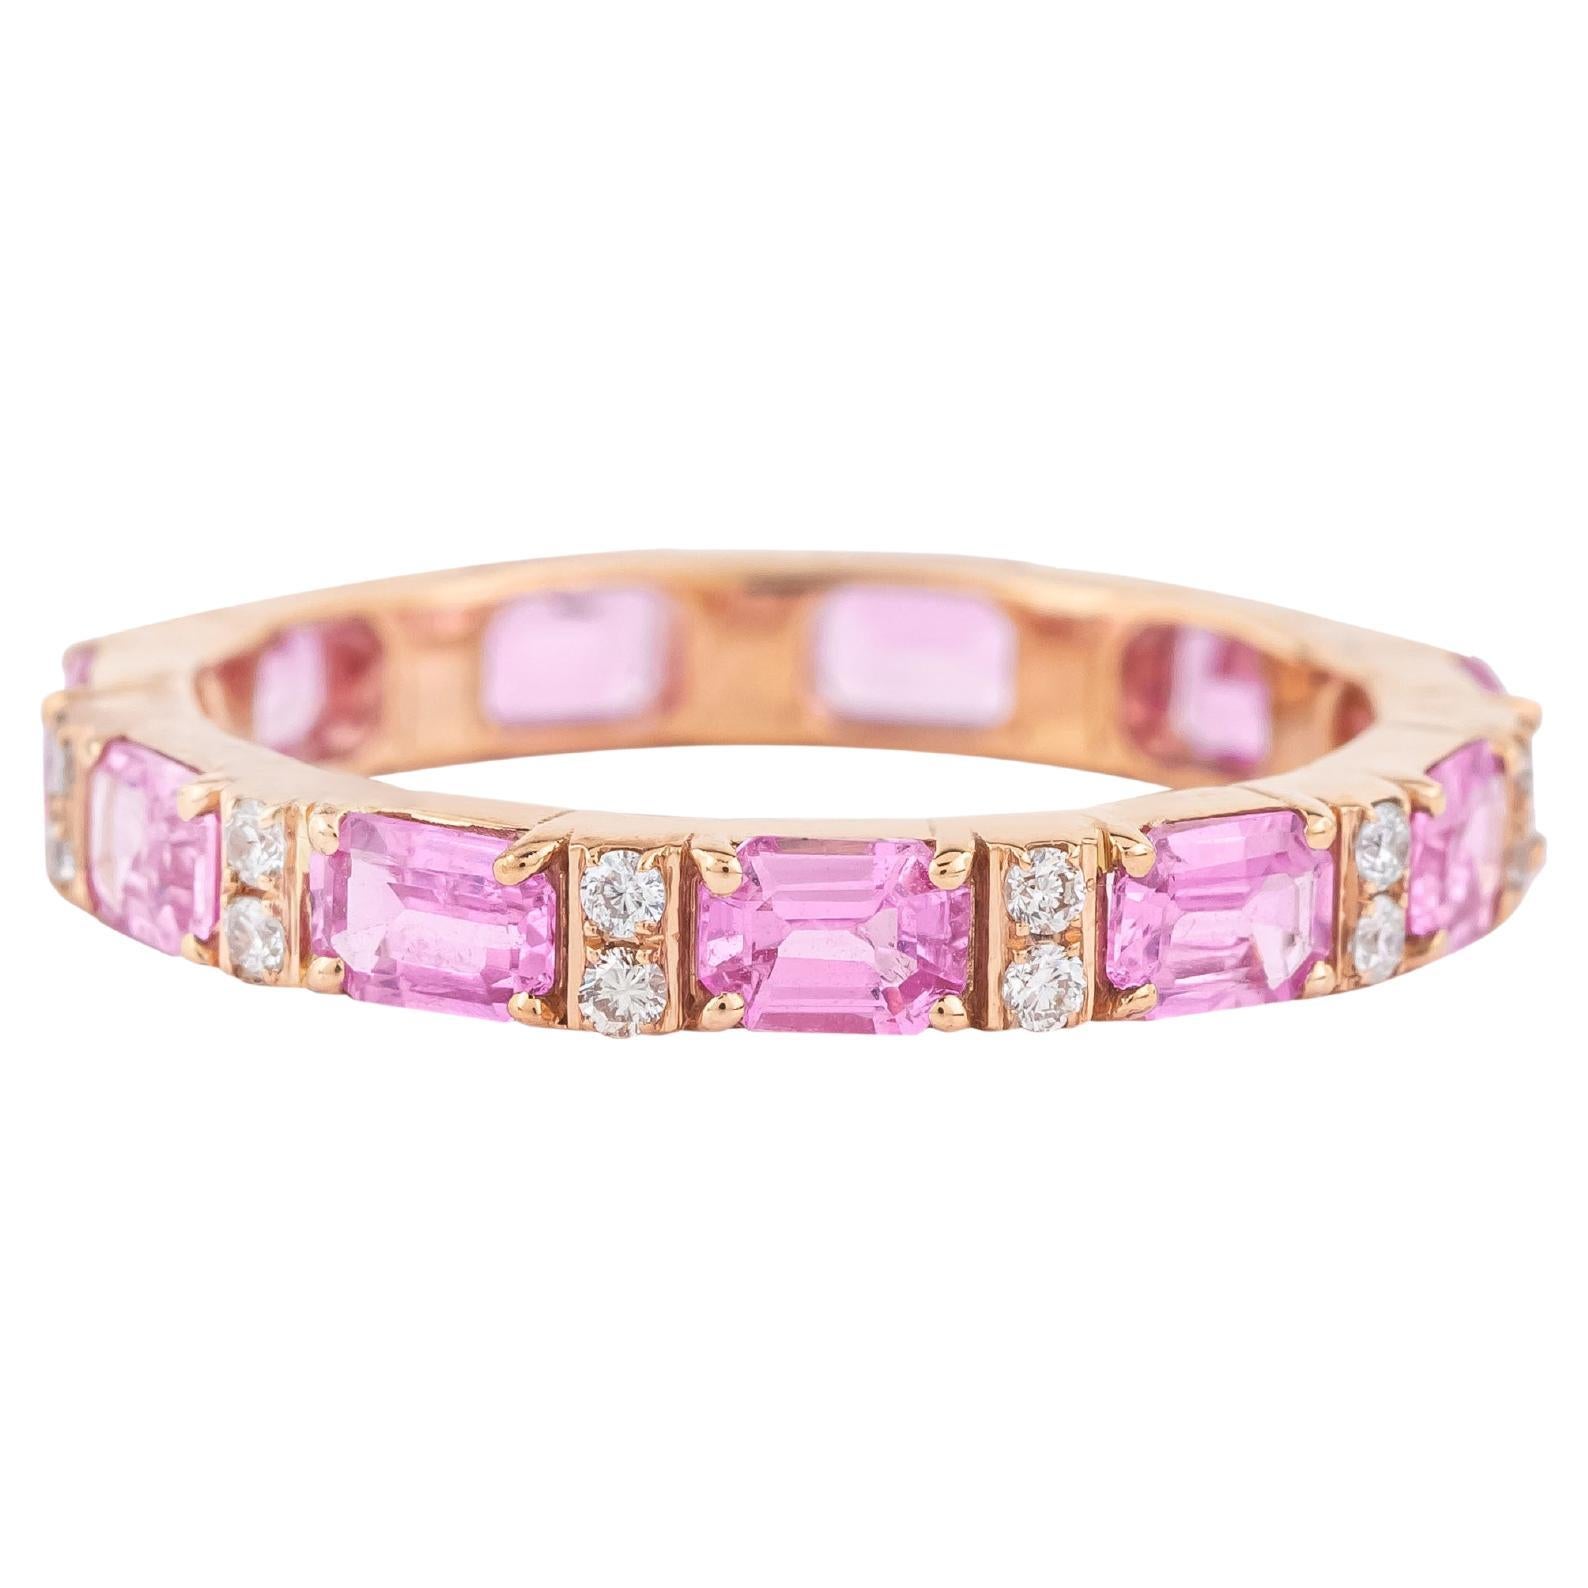 18 Karat Gold 2.39 Carat Diamond and Pink Sapphire Infinity Ring For Sale